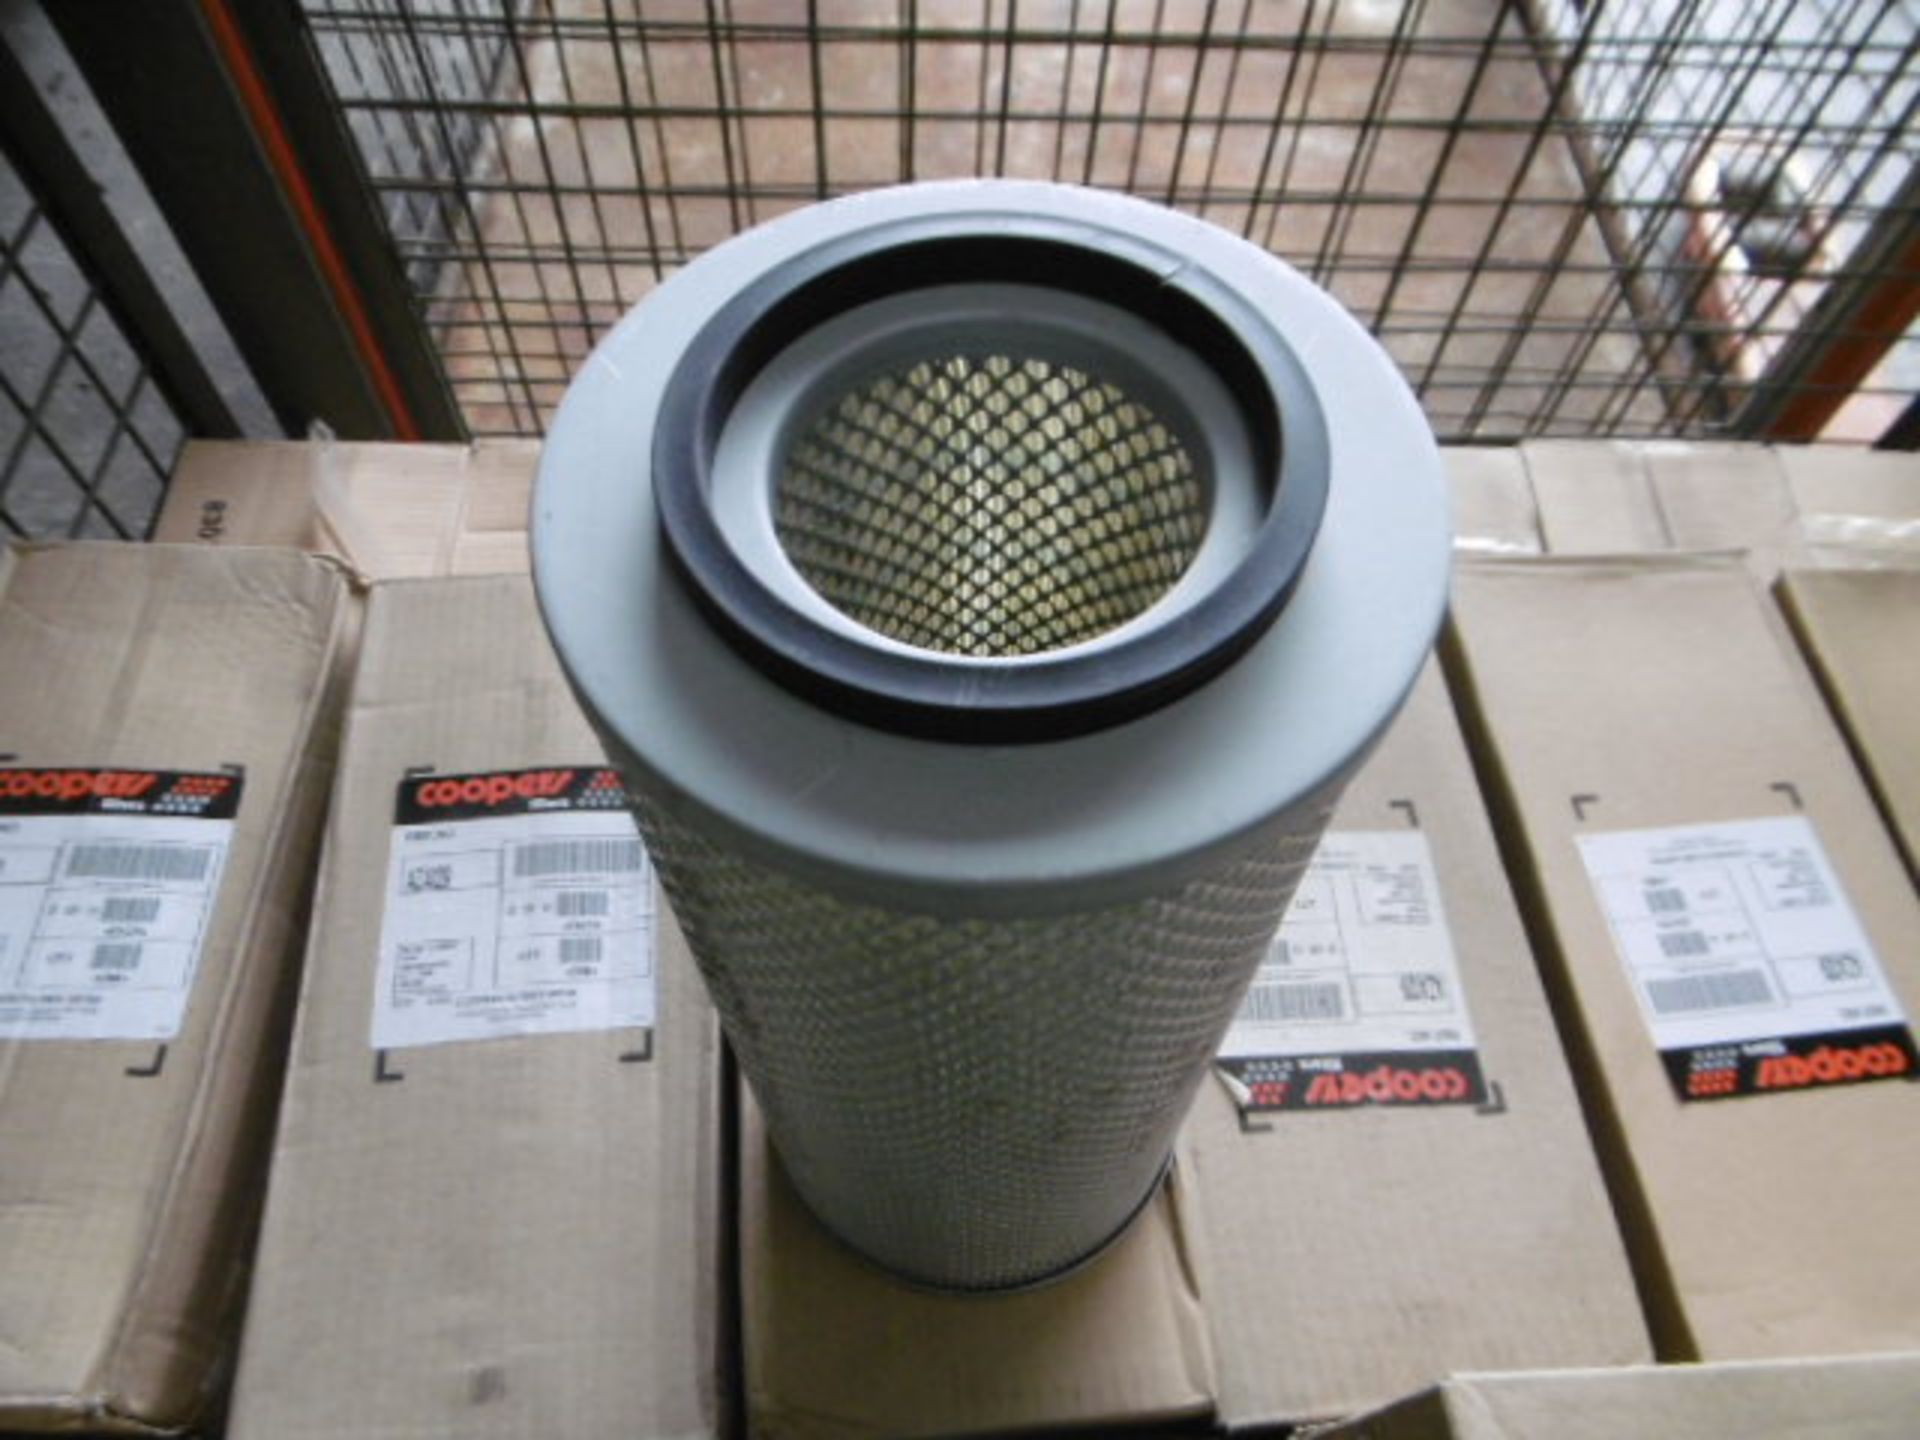 27 x Coopers AZA129 Air Filters - Image 3 of 4